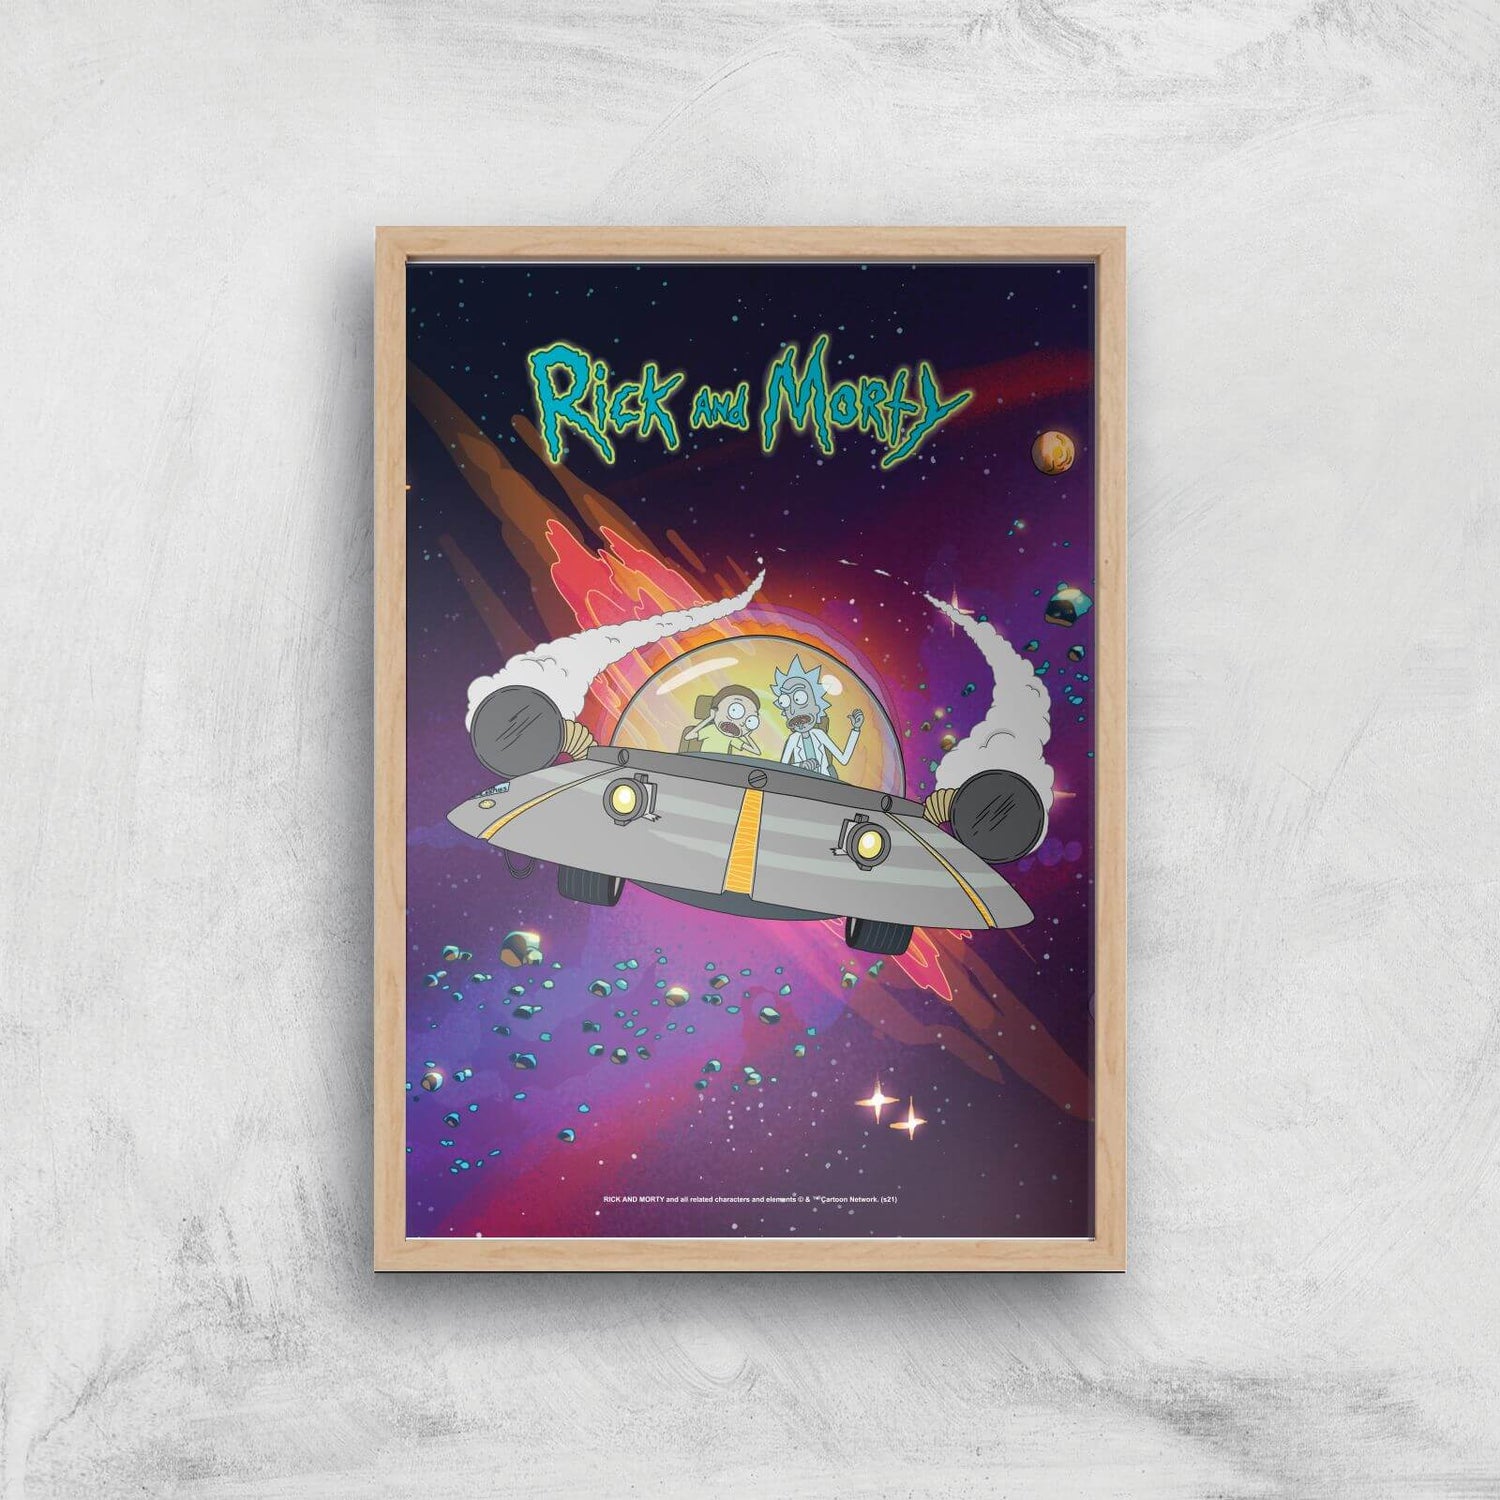 Rick and Morty Rocket Adventure Giclee Art Print - A3 - Wooden Frame